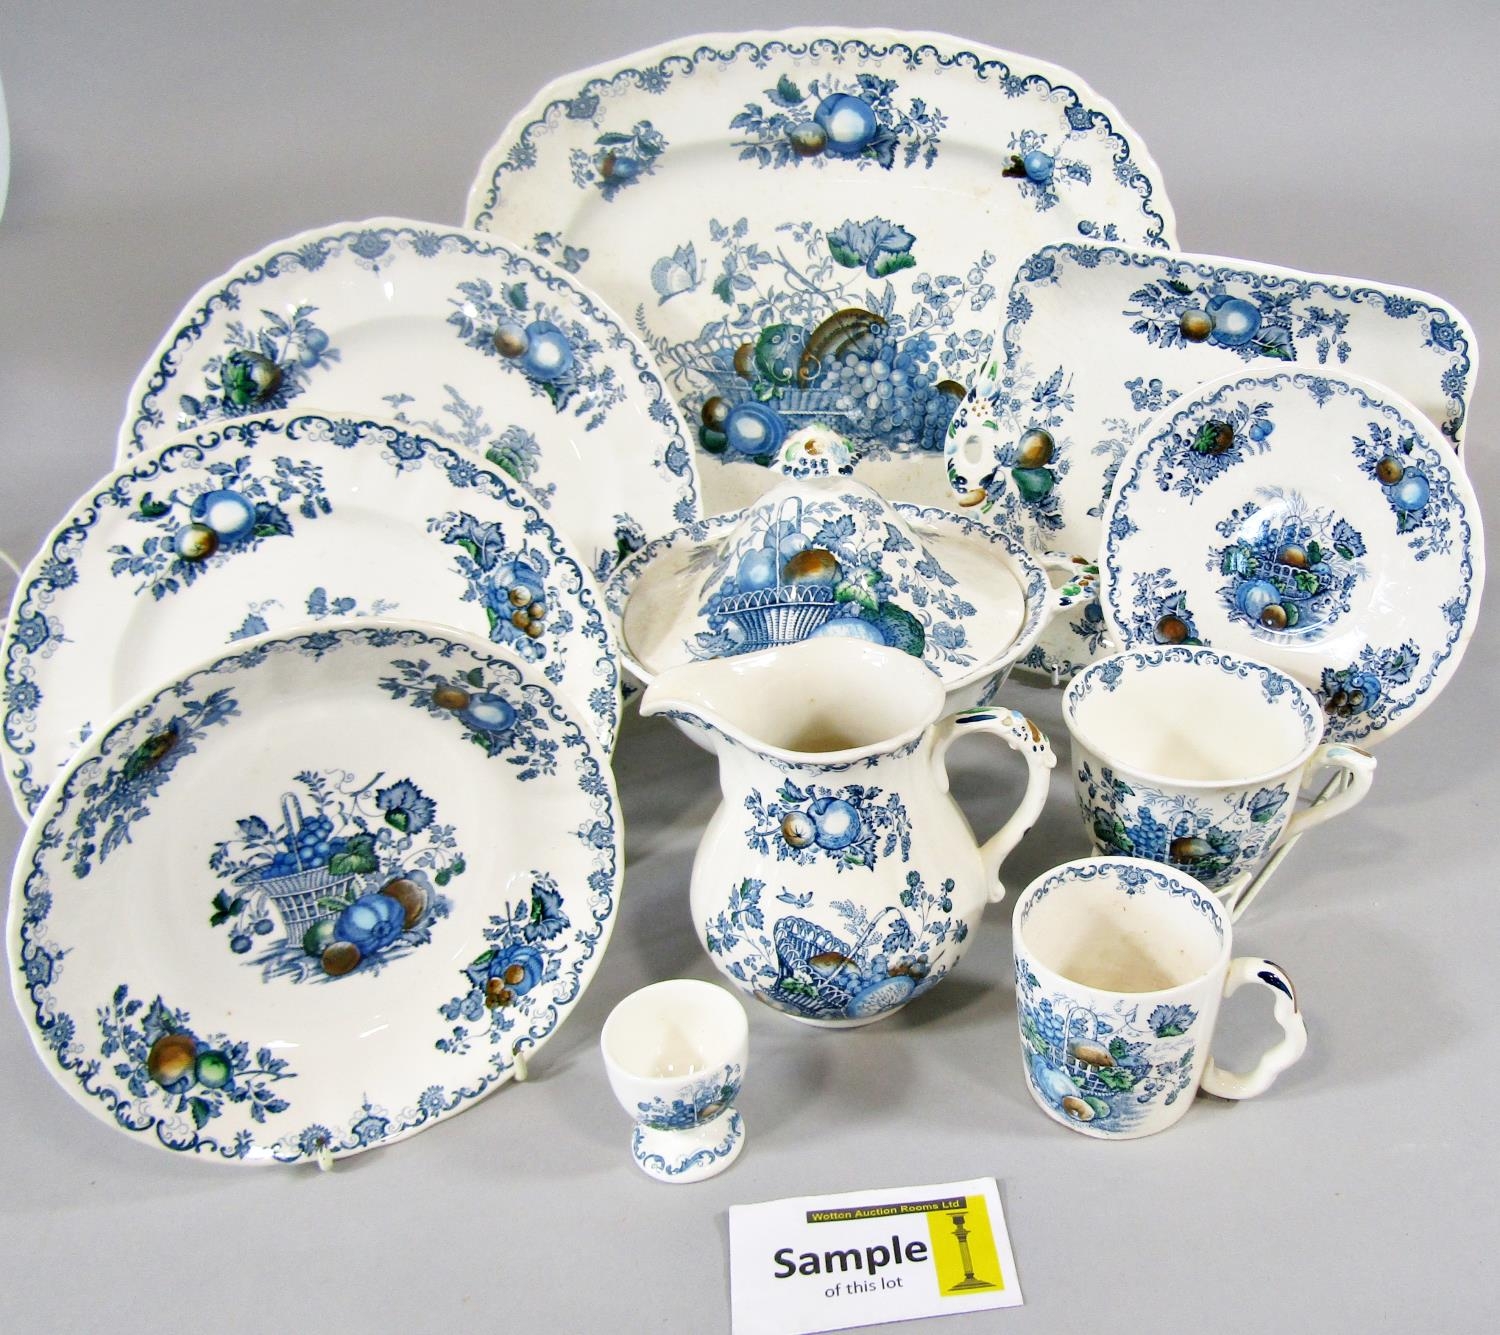 A collection of Masons Fruit Basket patterned dinner and tea wares, plates, tureens, cups and